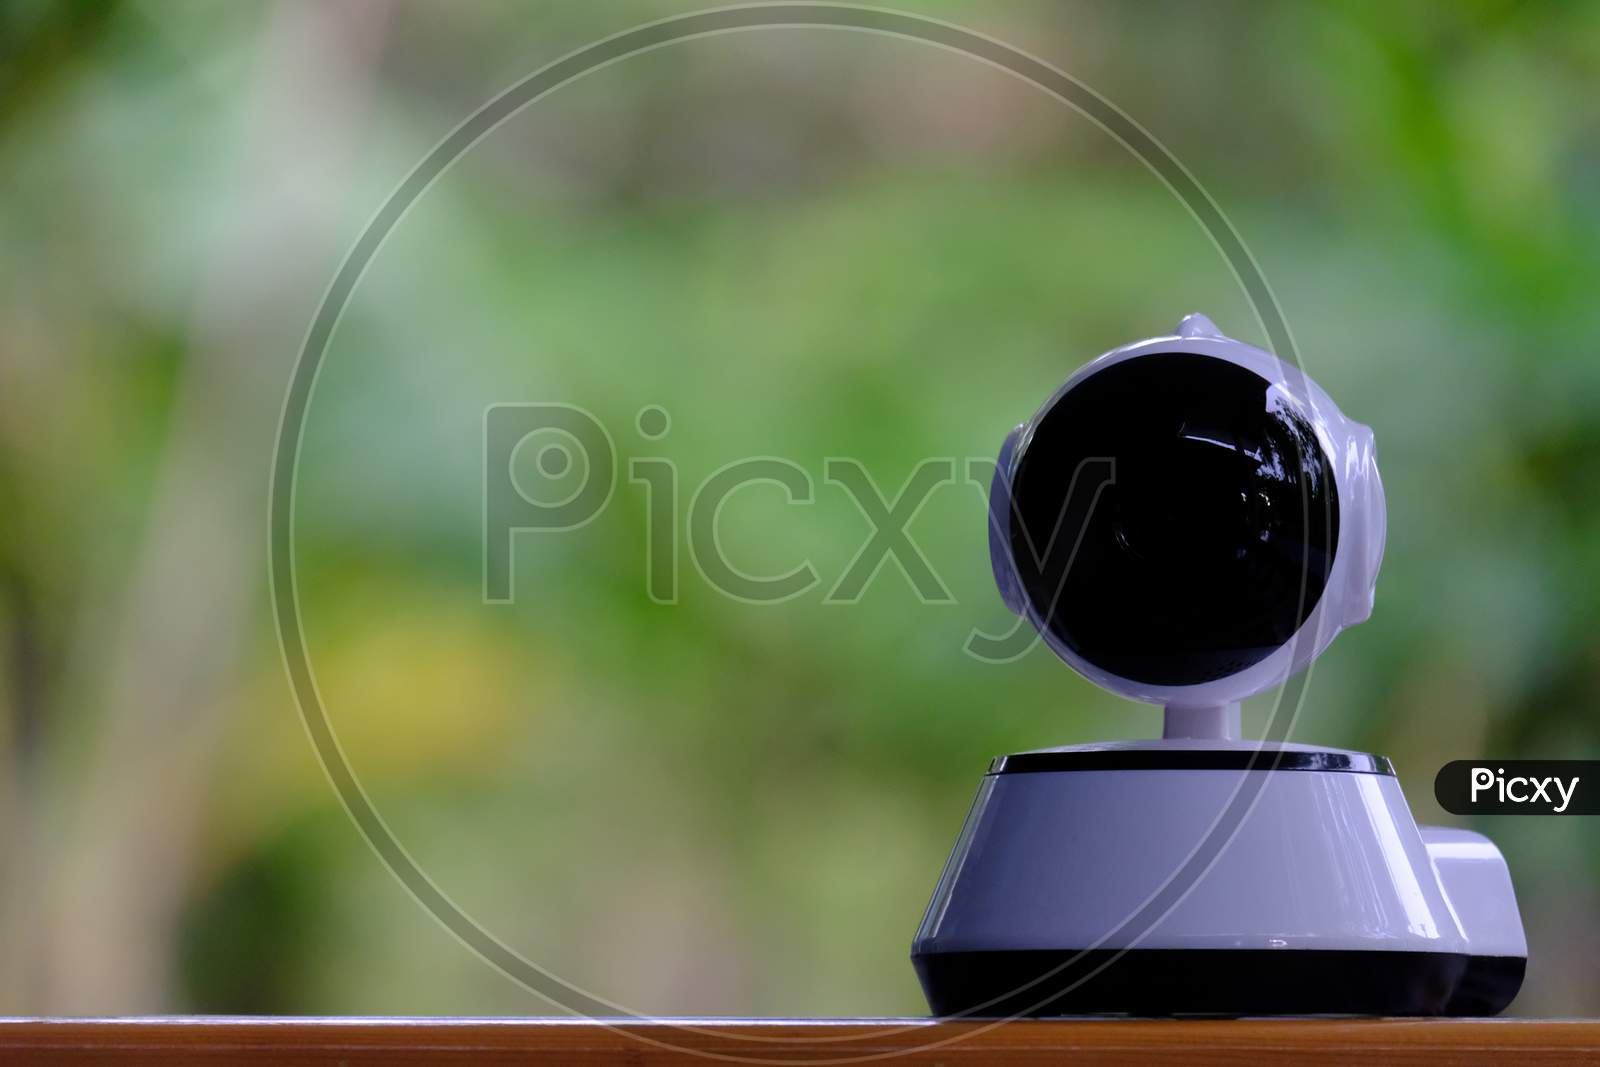 A White Modern Indoor Cctv Camera With Internal Infrared Is Rotating To Check Home Security With Wireless Connection Via Smartphone'S Application By Internet Ip Controlled With Blurred Background